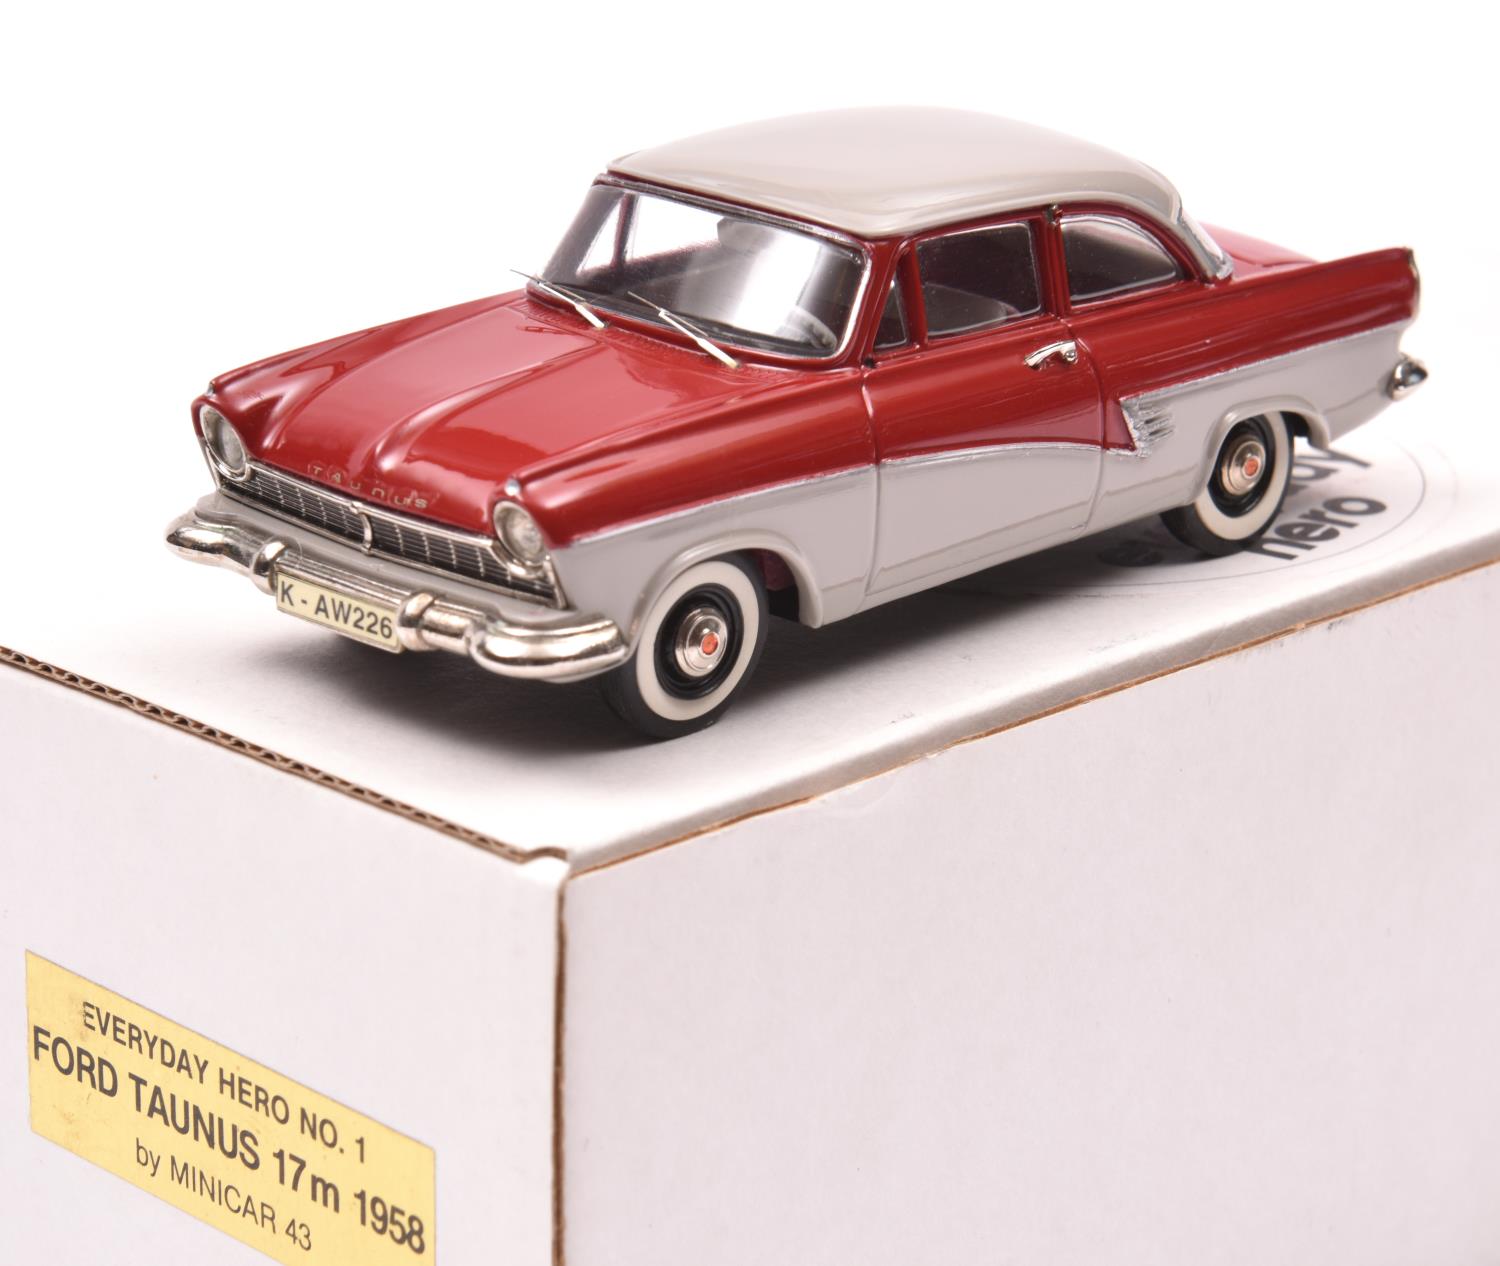 Kenna Models for Minicar 43 'everyday hero' 1958 Ford Taunus 17m 2- door saloon. In red with pale